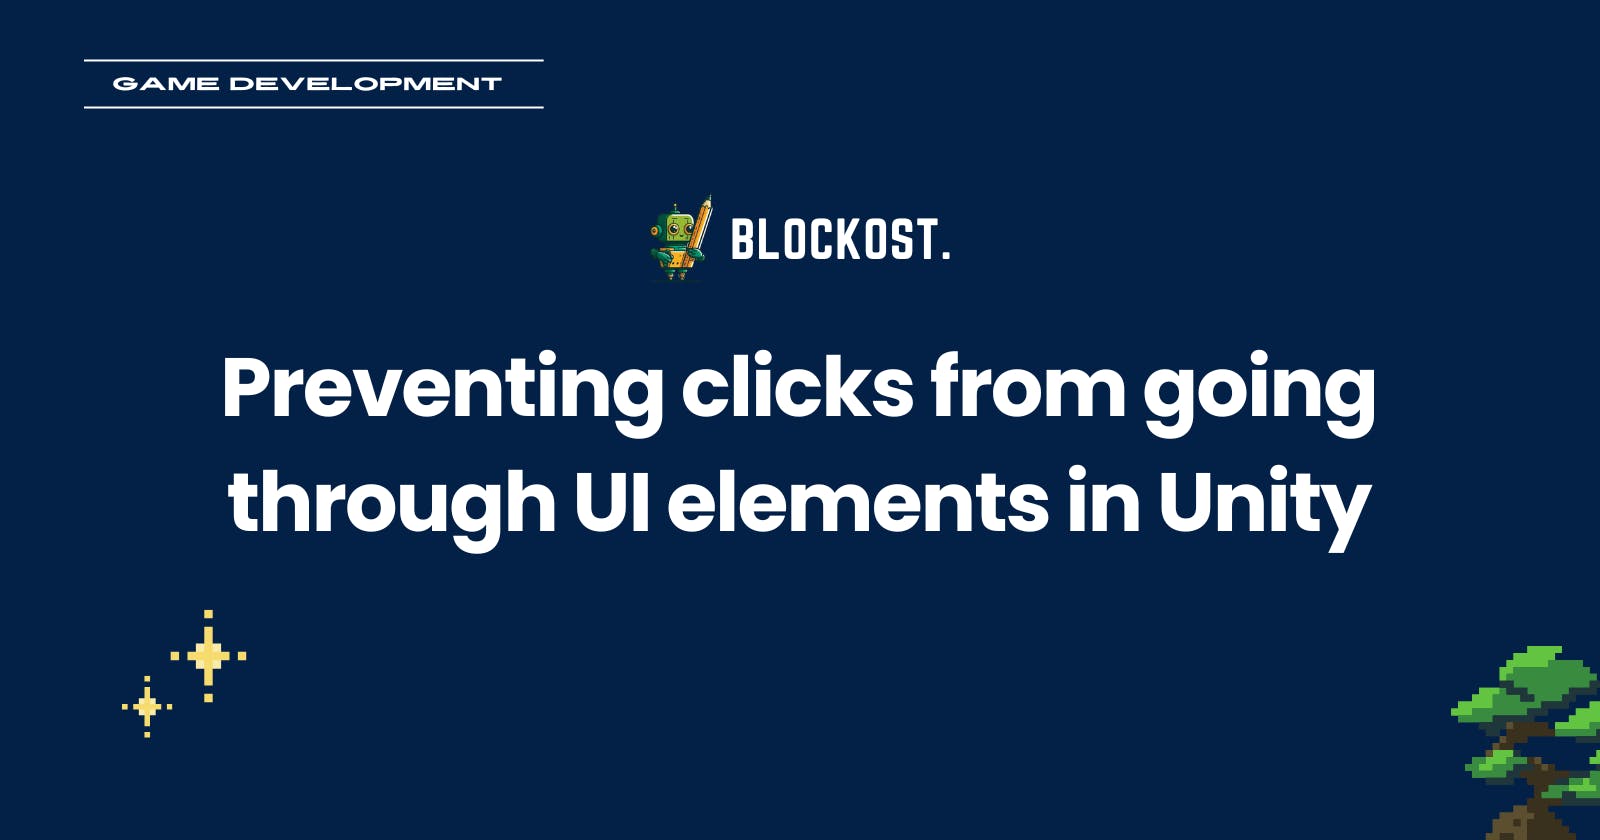 Preventing clicks from going through UI elements in Unity